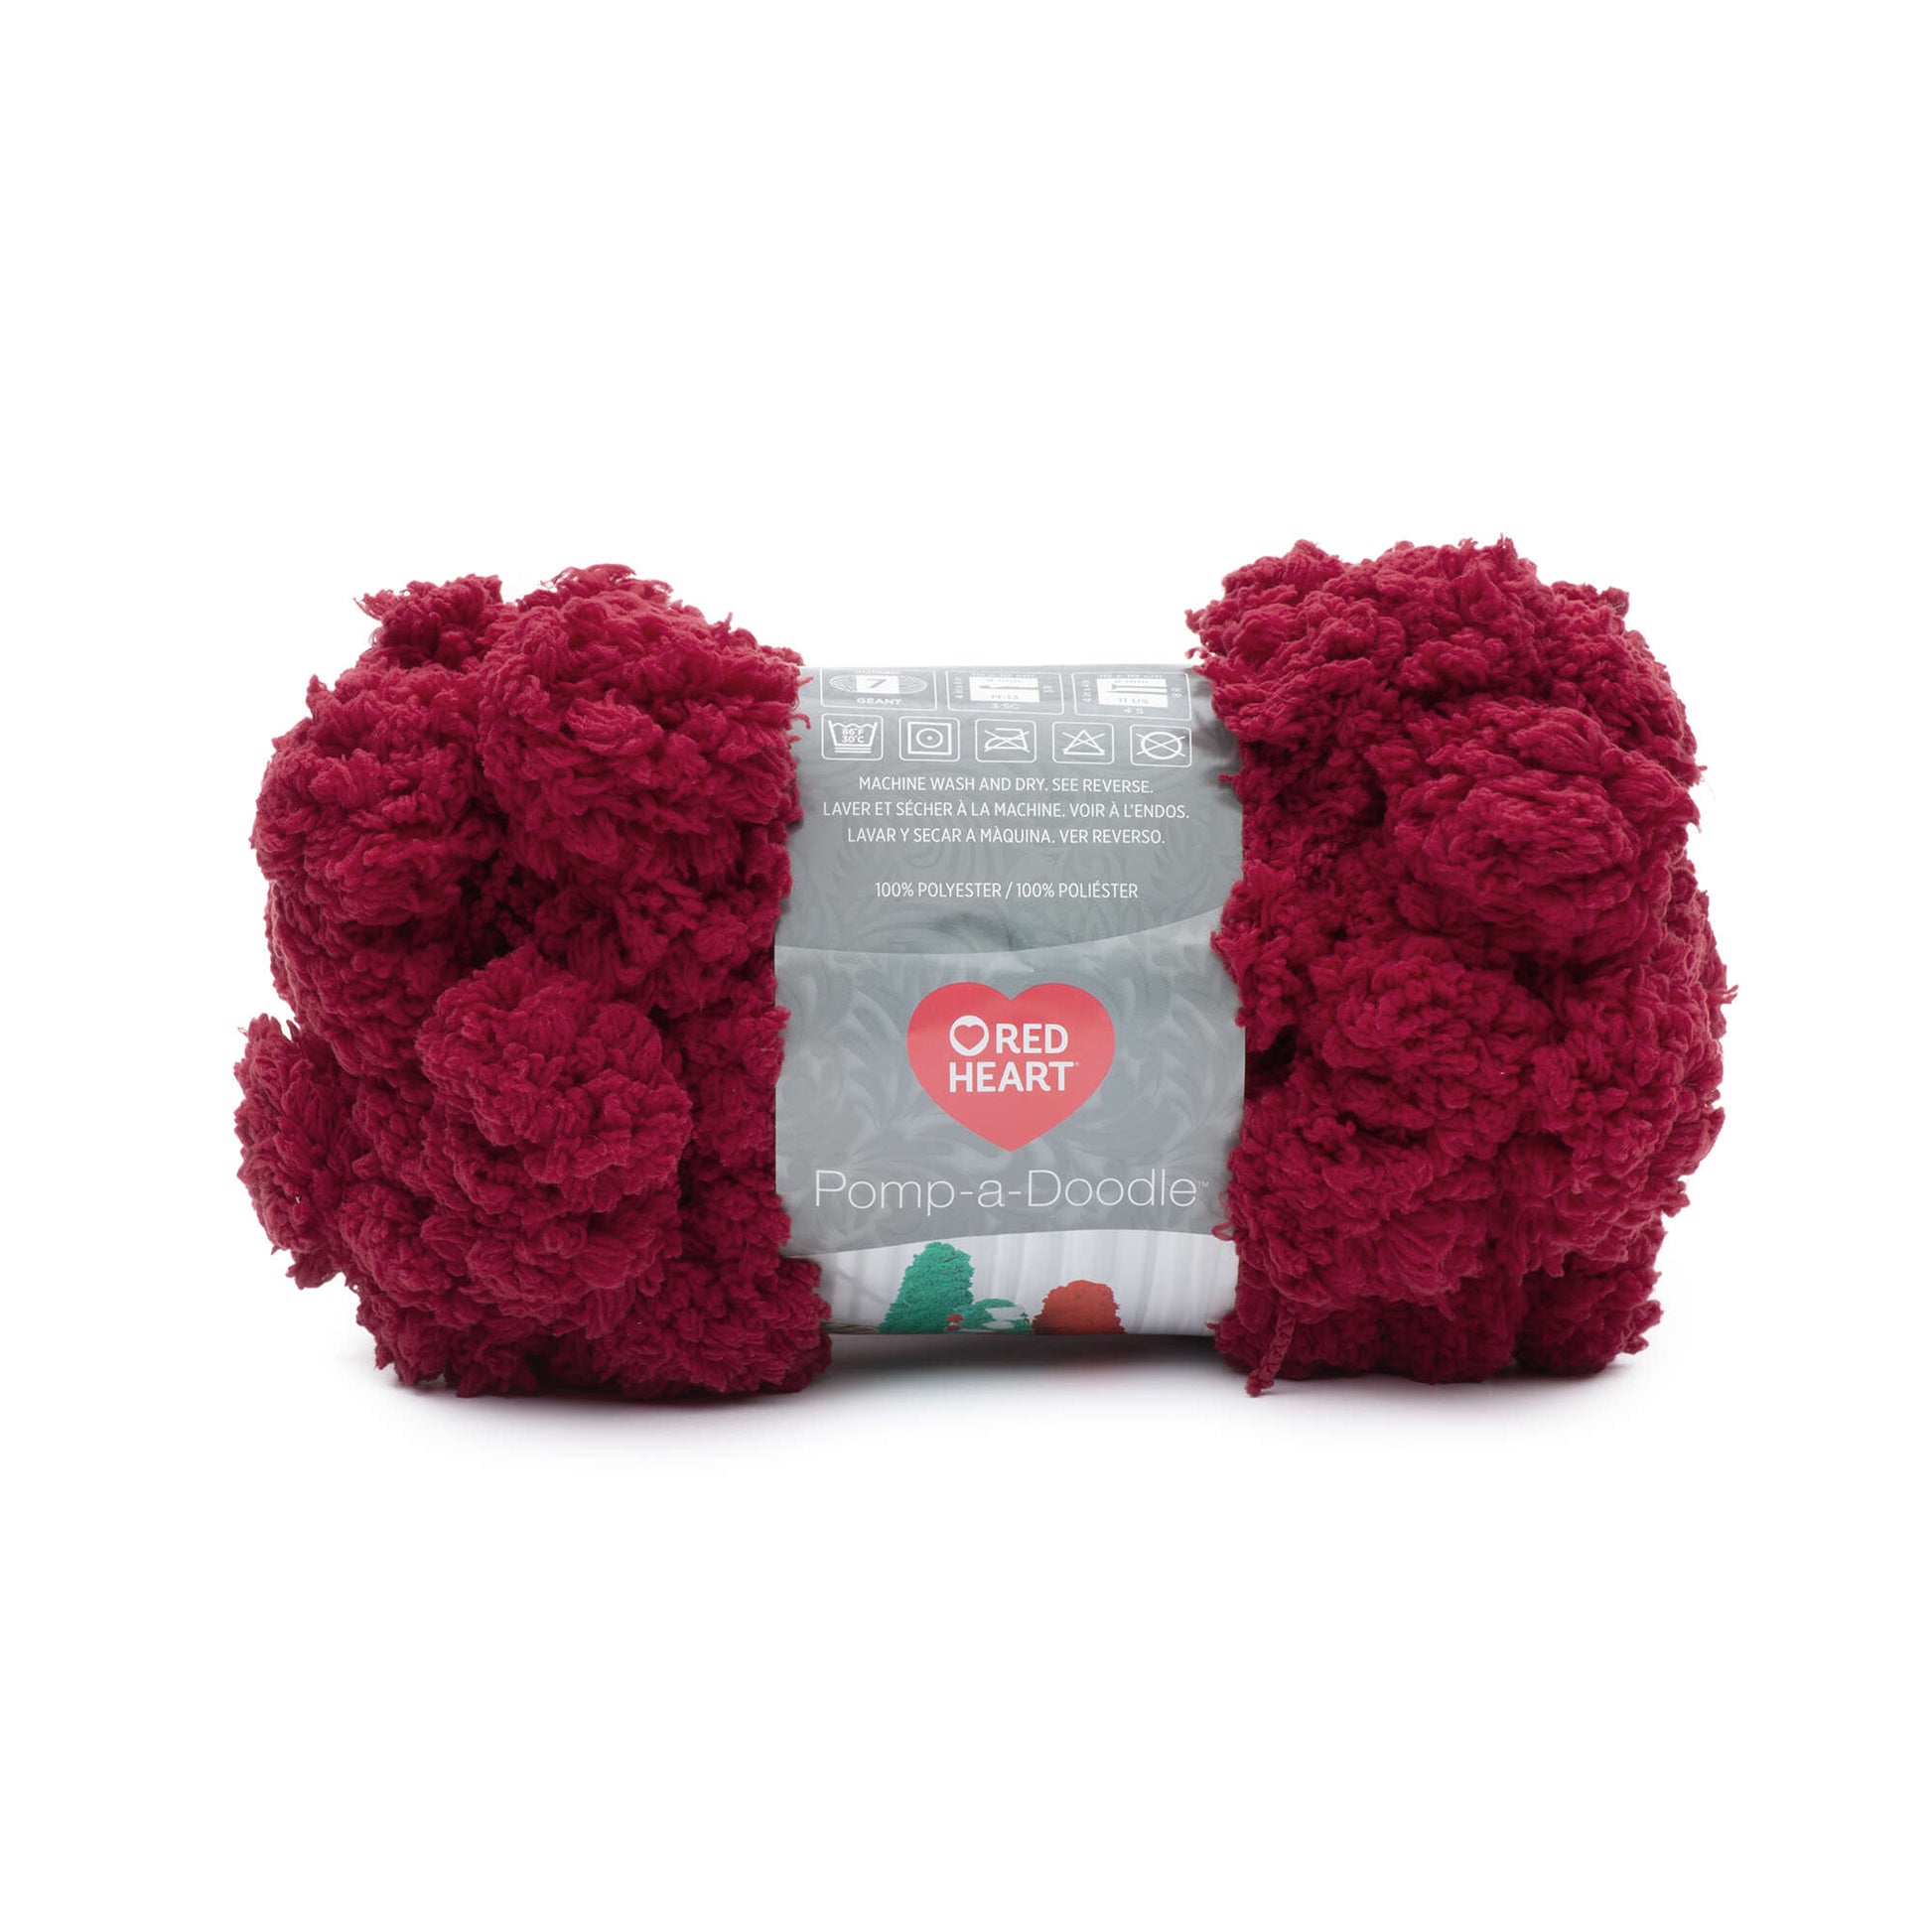 Red Heart Pomp-a-Doodle Yarn - Clearance Shades